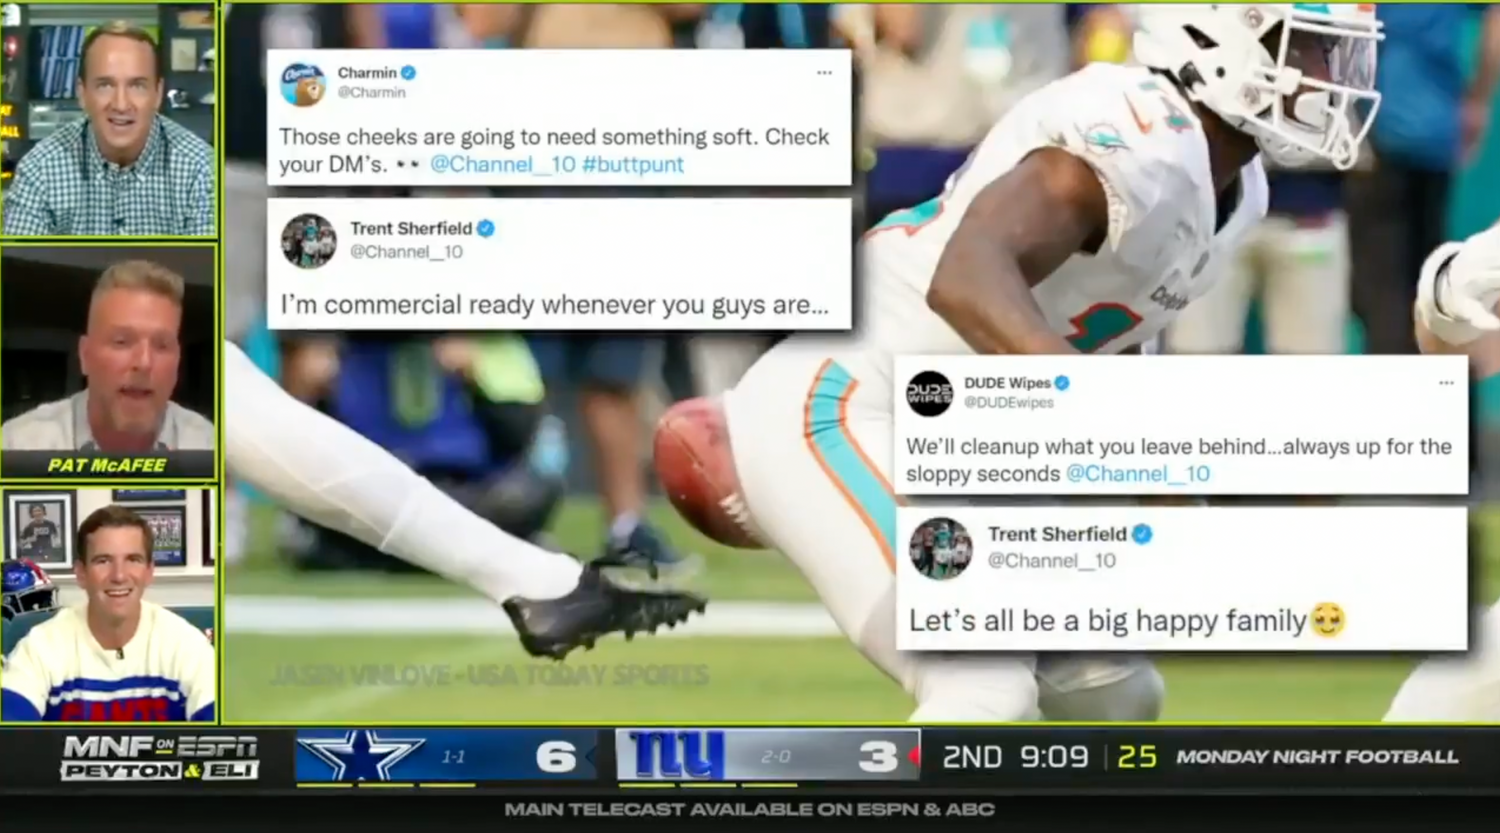 After Butt Punt, DUDE Wipes Offers to Clean Up Charmin’s ‘Sloppy Seconds’